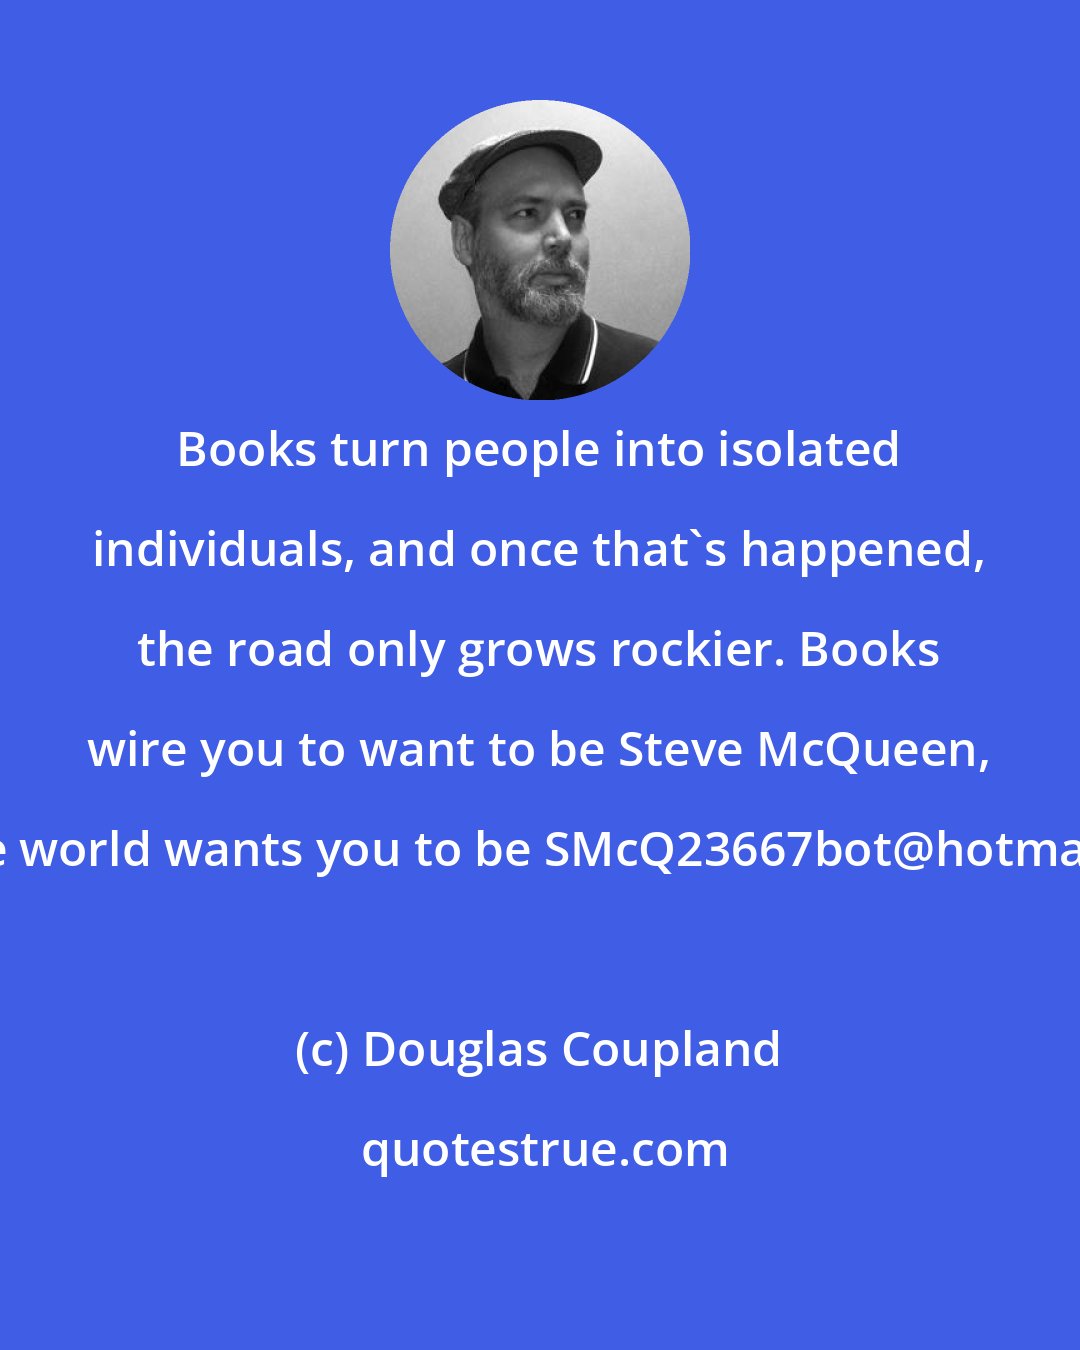 Douglas Coupland: Books turn people into isolated individuals, and once that's happened, the road only grows rockier. Books wire you to want to be Steve McQueen, but the world wants you to be SMcQ23667bot@hotmail.com.